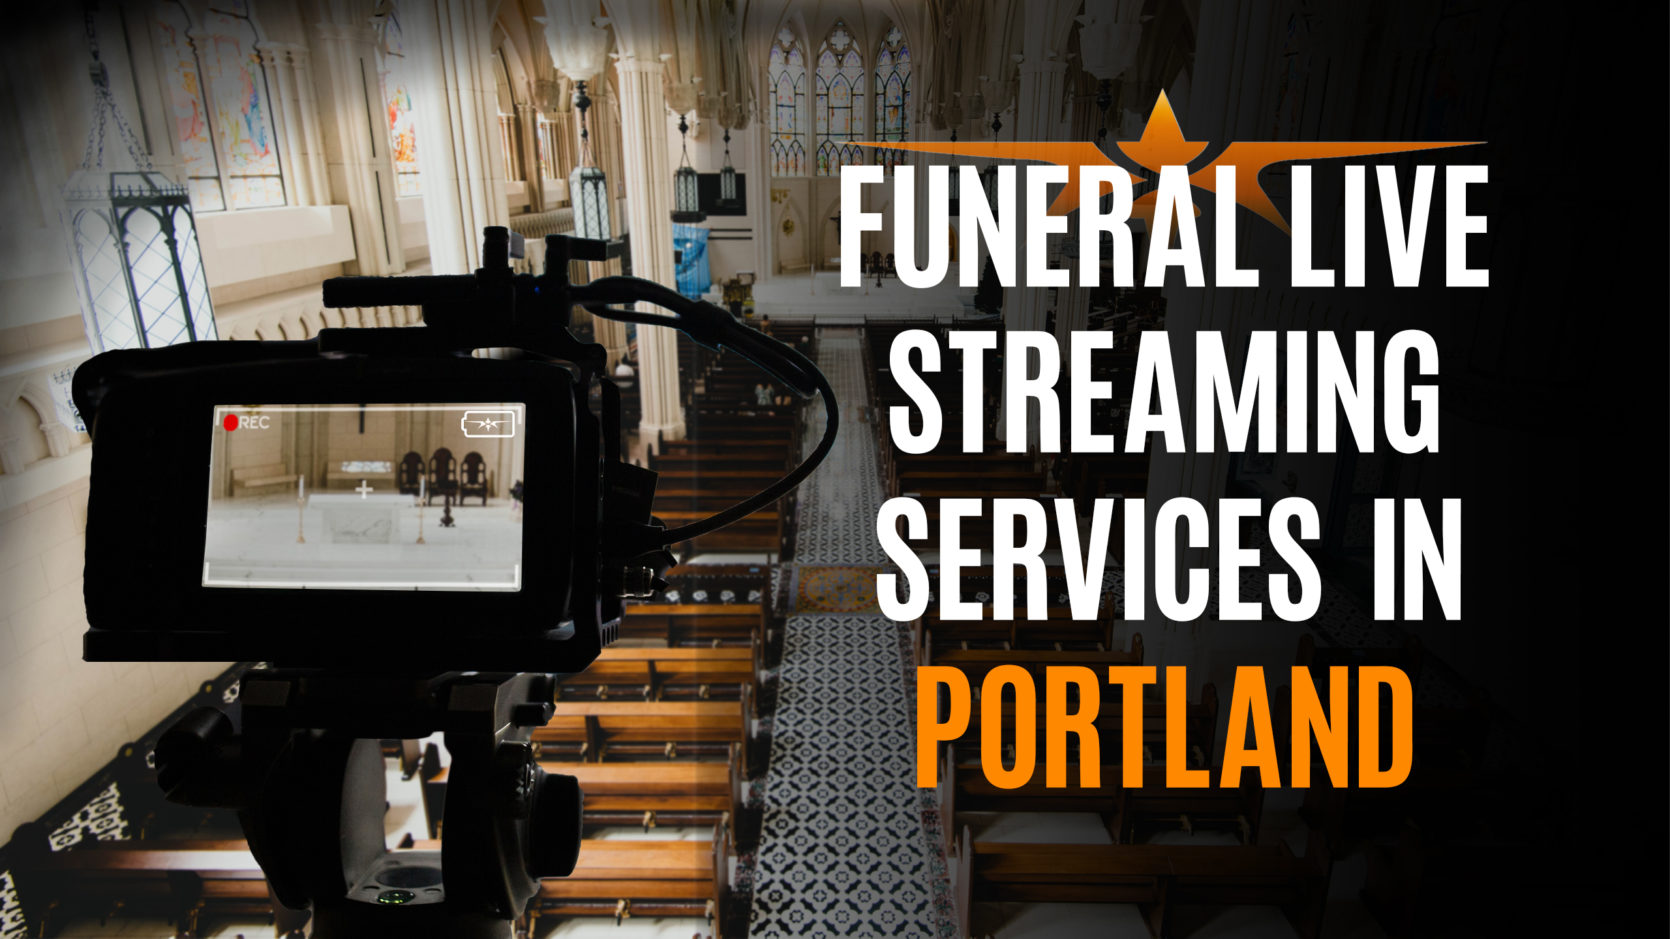 Funeral Live Streaming Services in Portland